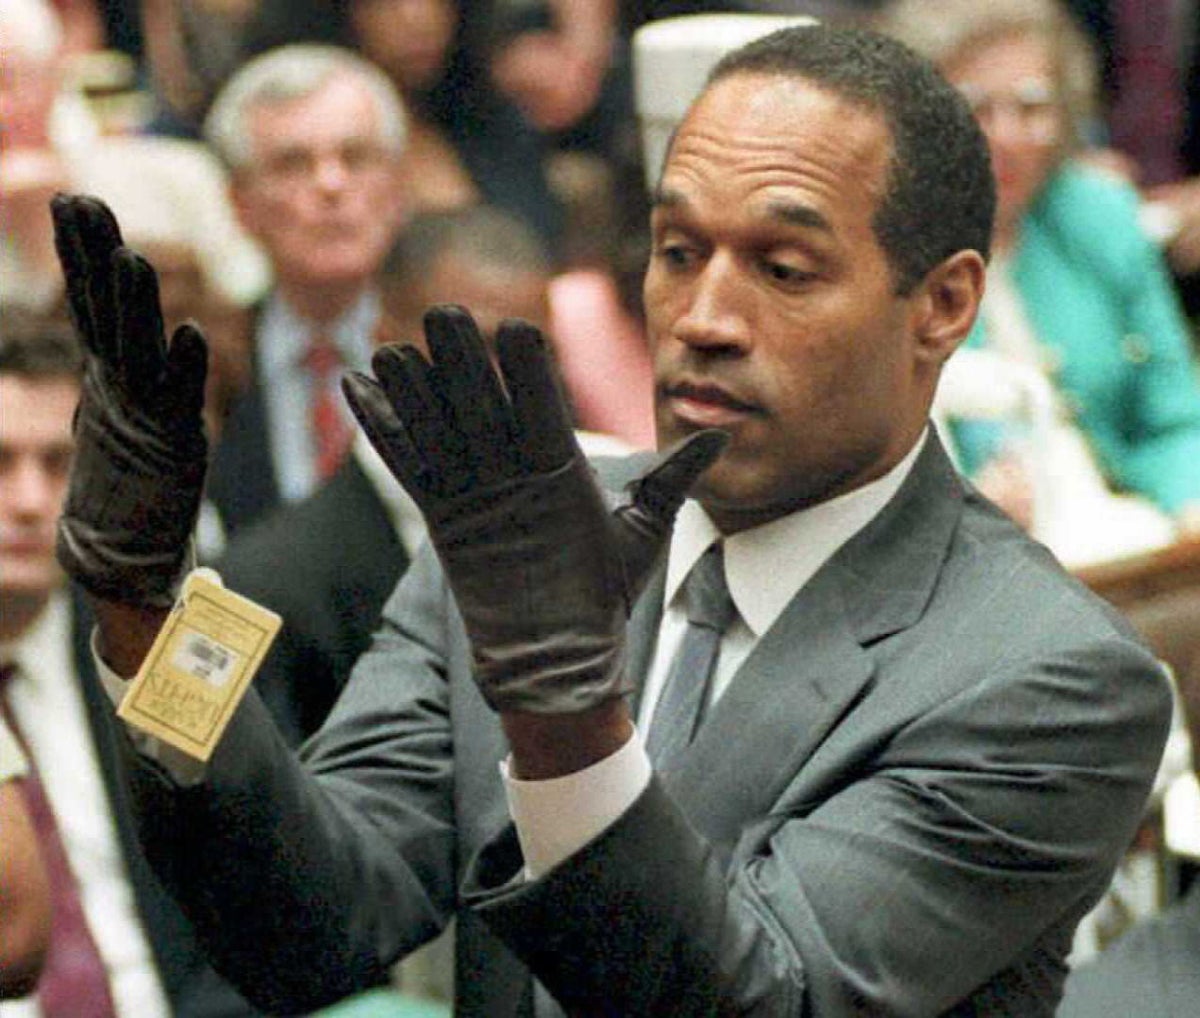 OJ Simpson allegations: The charges against NFL star acquitted of murdering wife Nicole Brown 